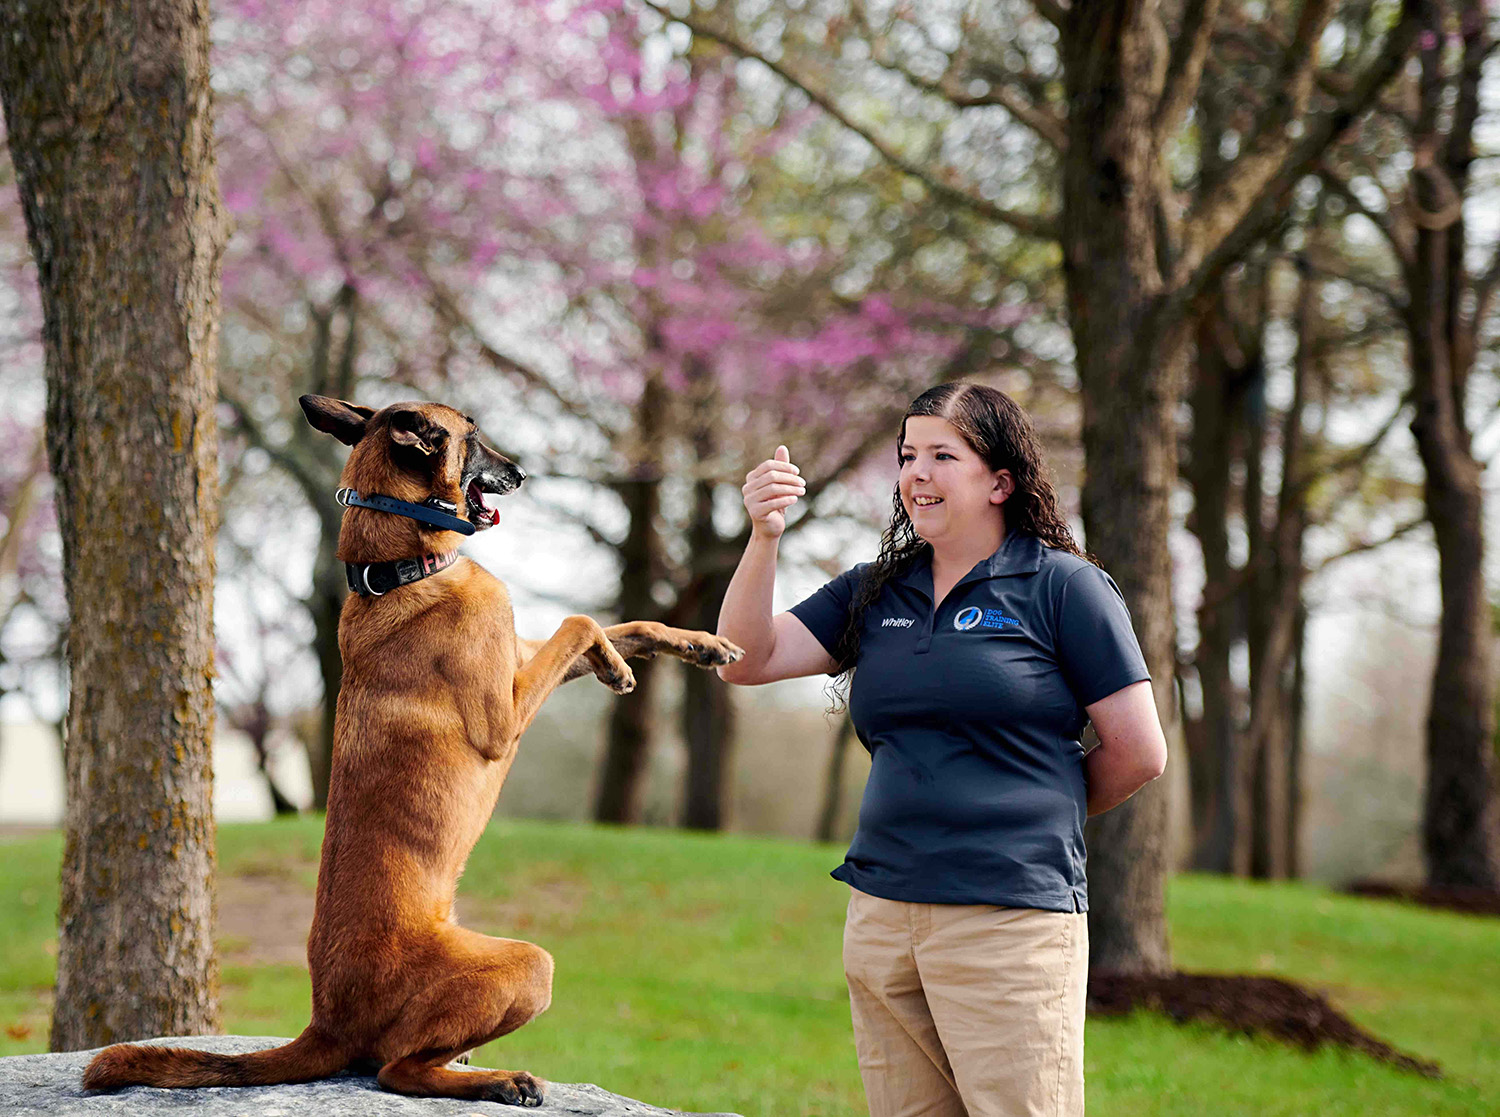 Dog Training Elite owner enjoys the business model and the pups in this dog business for sale.